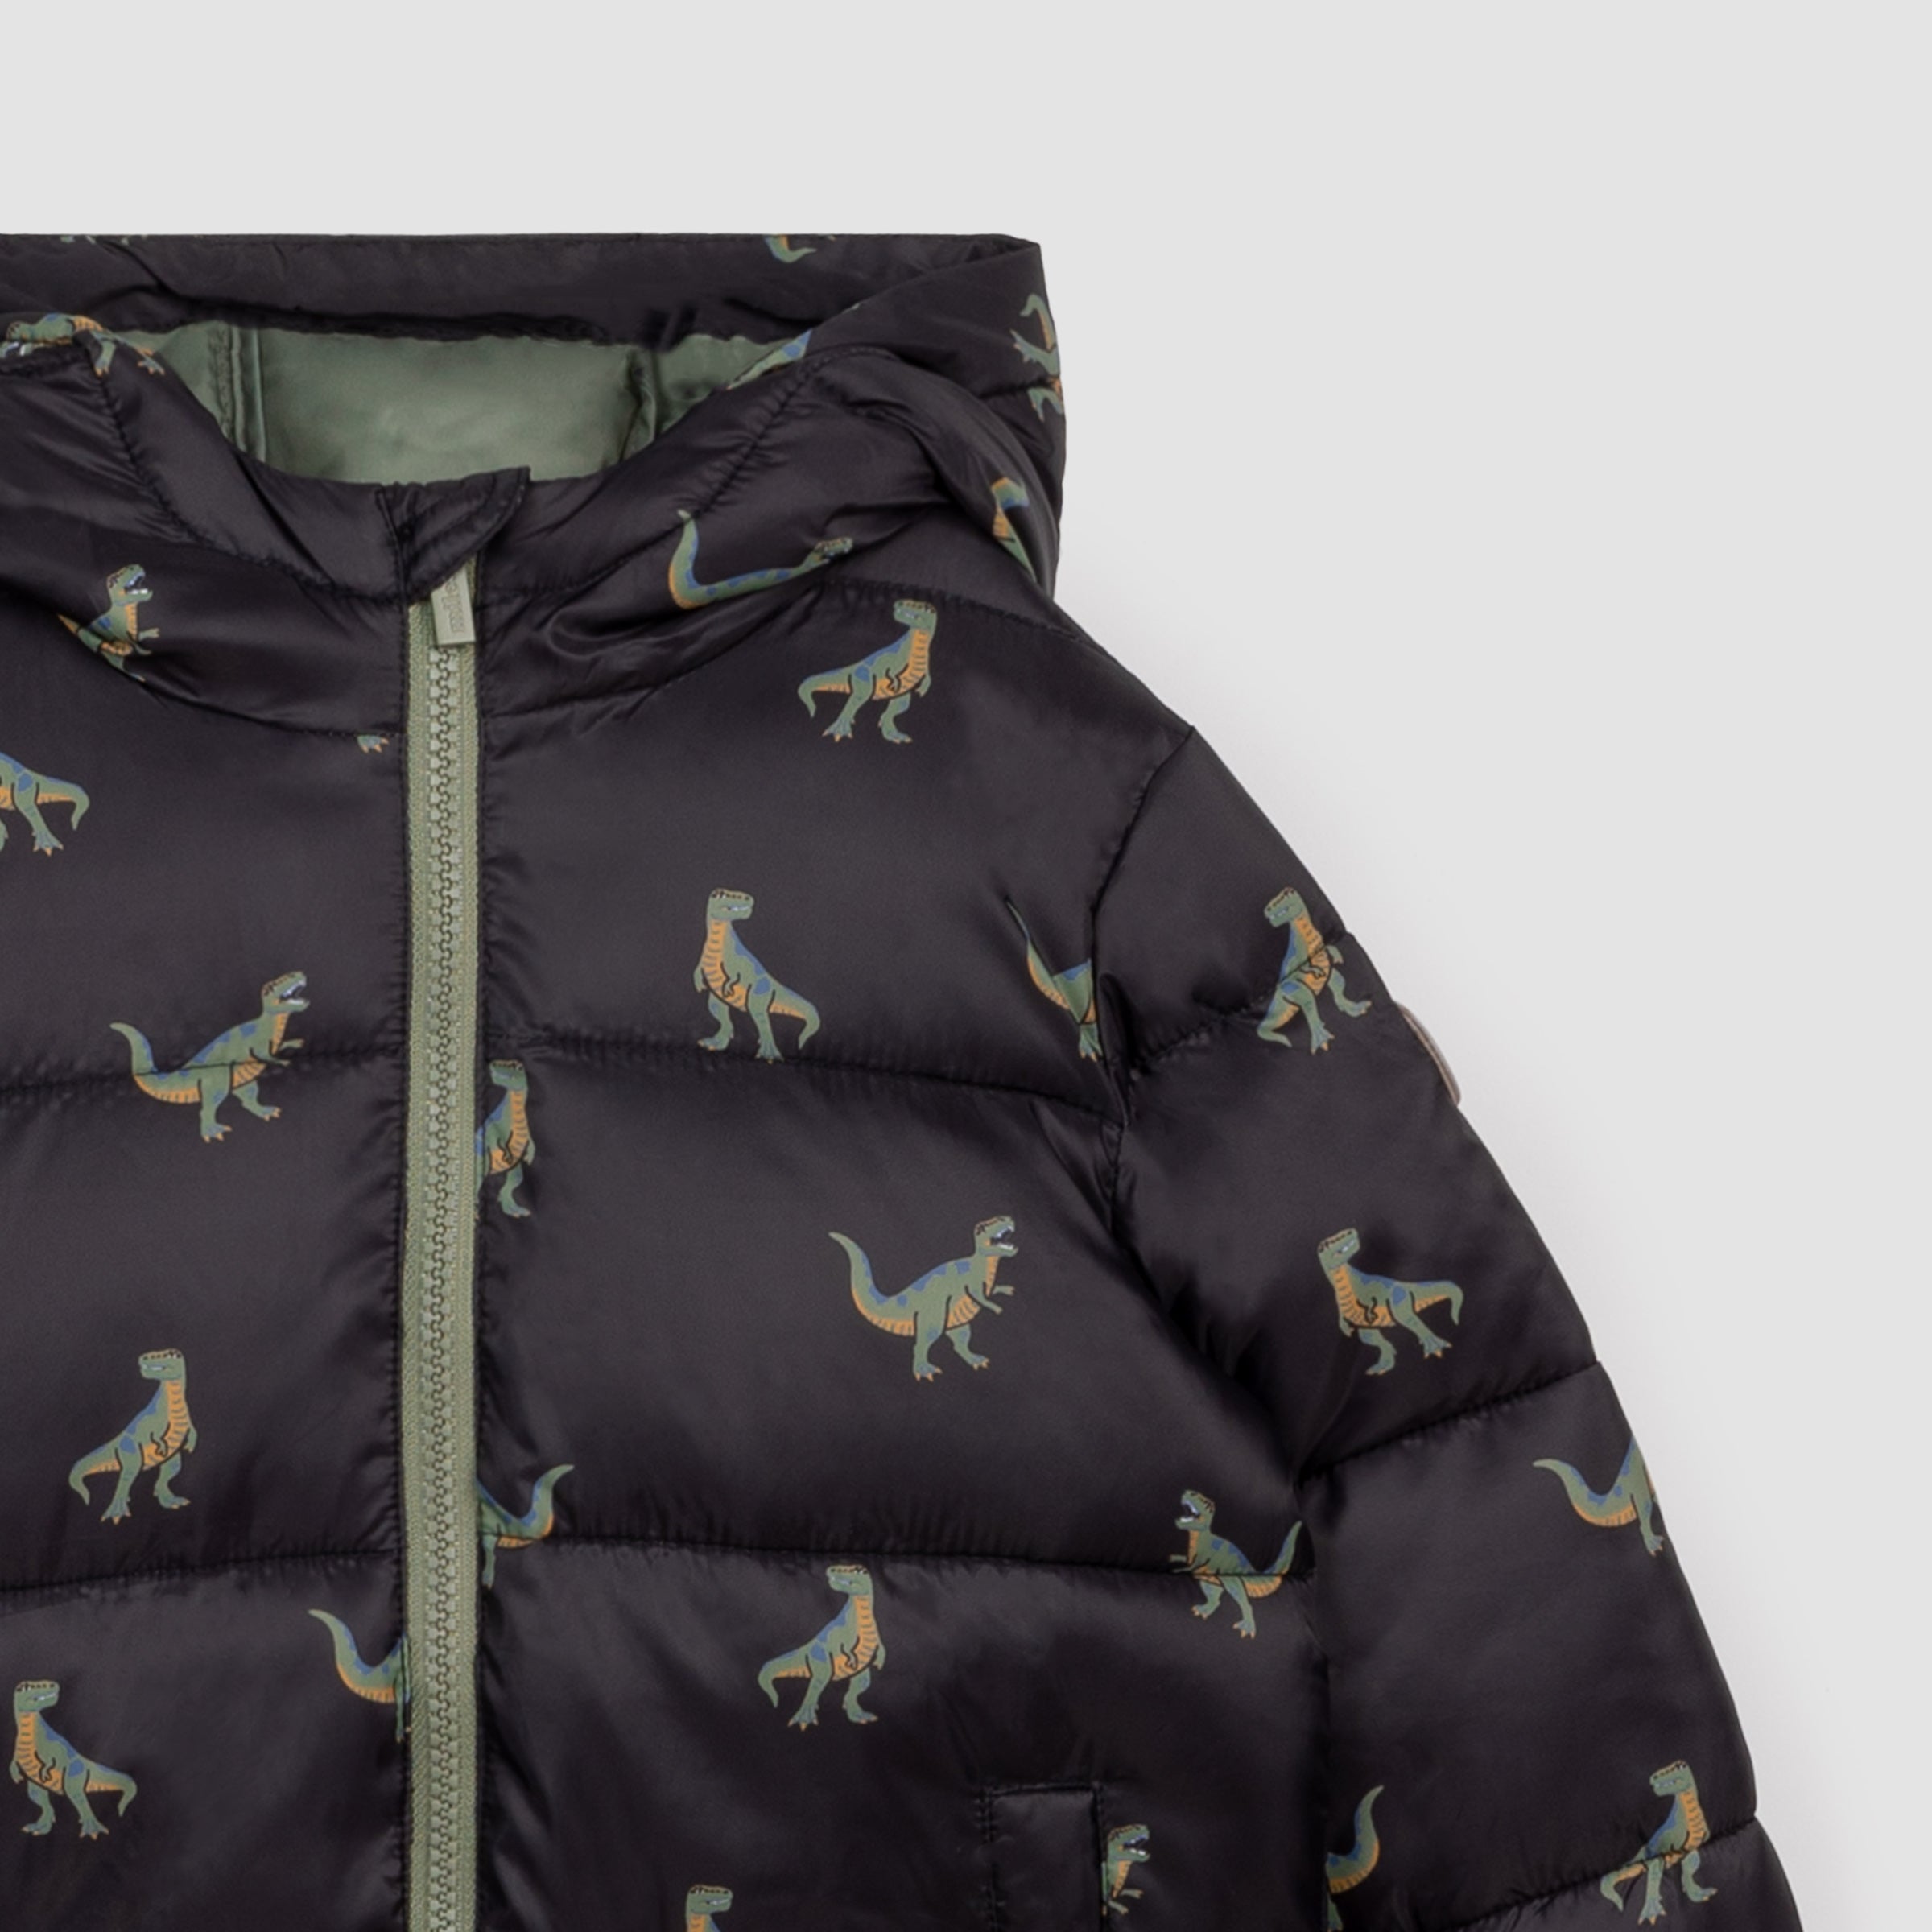 T-Rex Print on Black Hooded Packable – miles the label